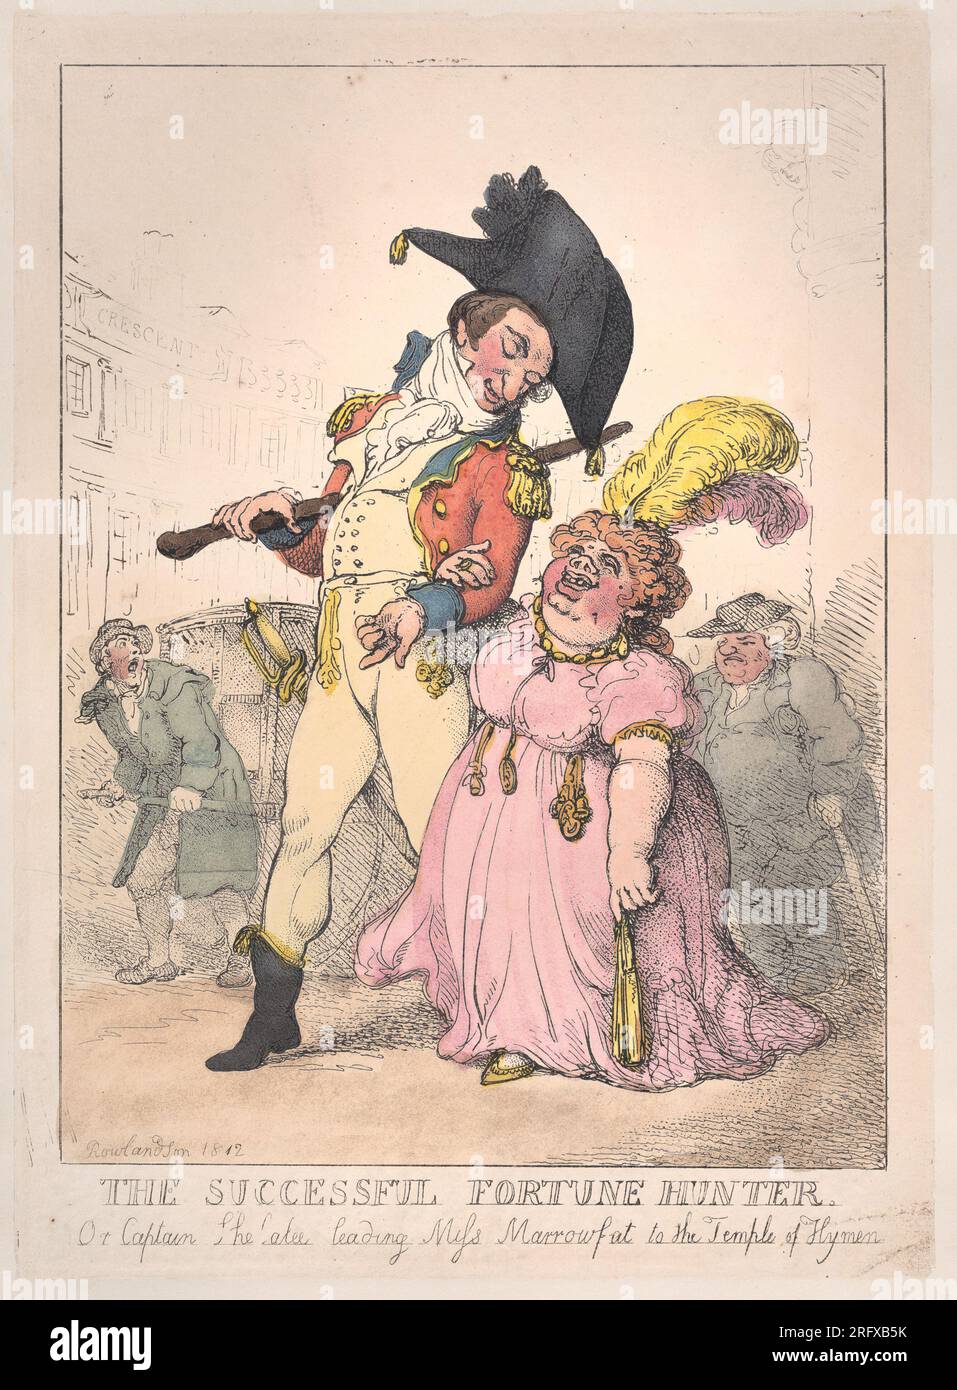 The Successful Fortune Hunter, or Captain Shelalee Leading Miss Marrowfat to the Temple of Hymen [1802], reissued 1812 by Thomas Rowlandson Stock Photo